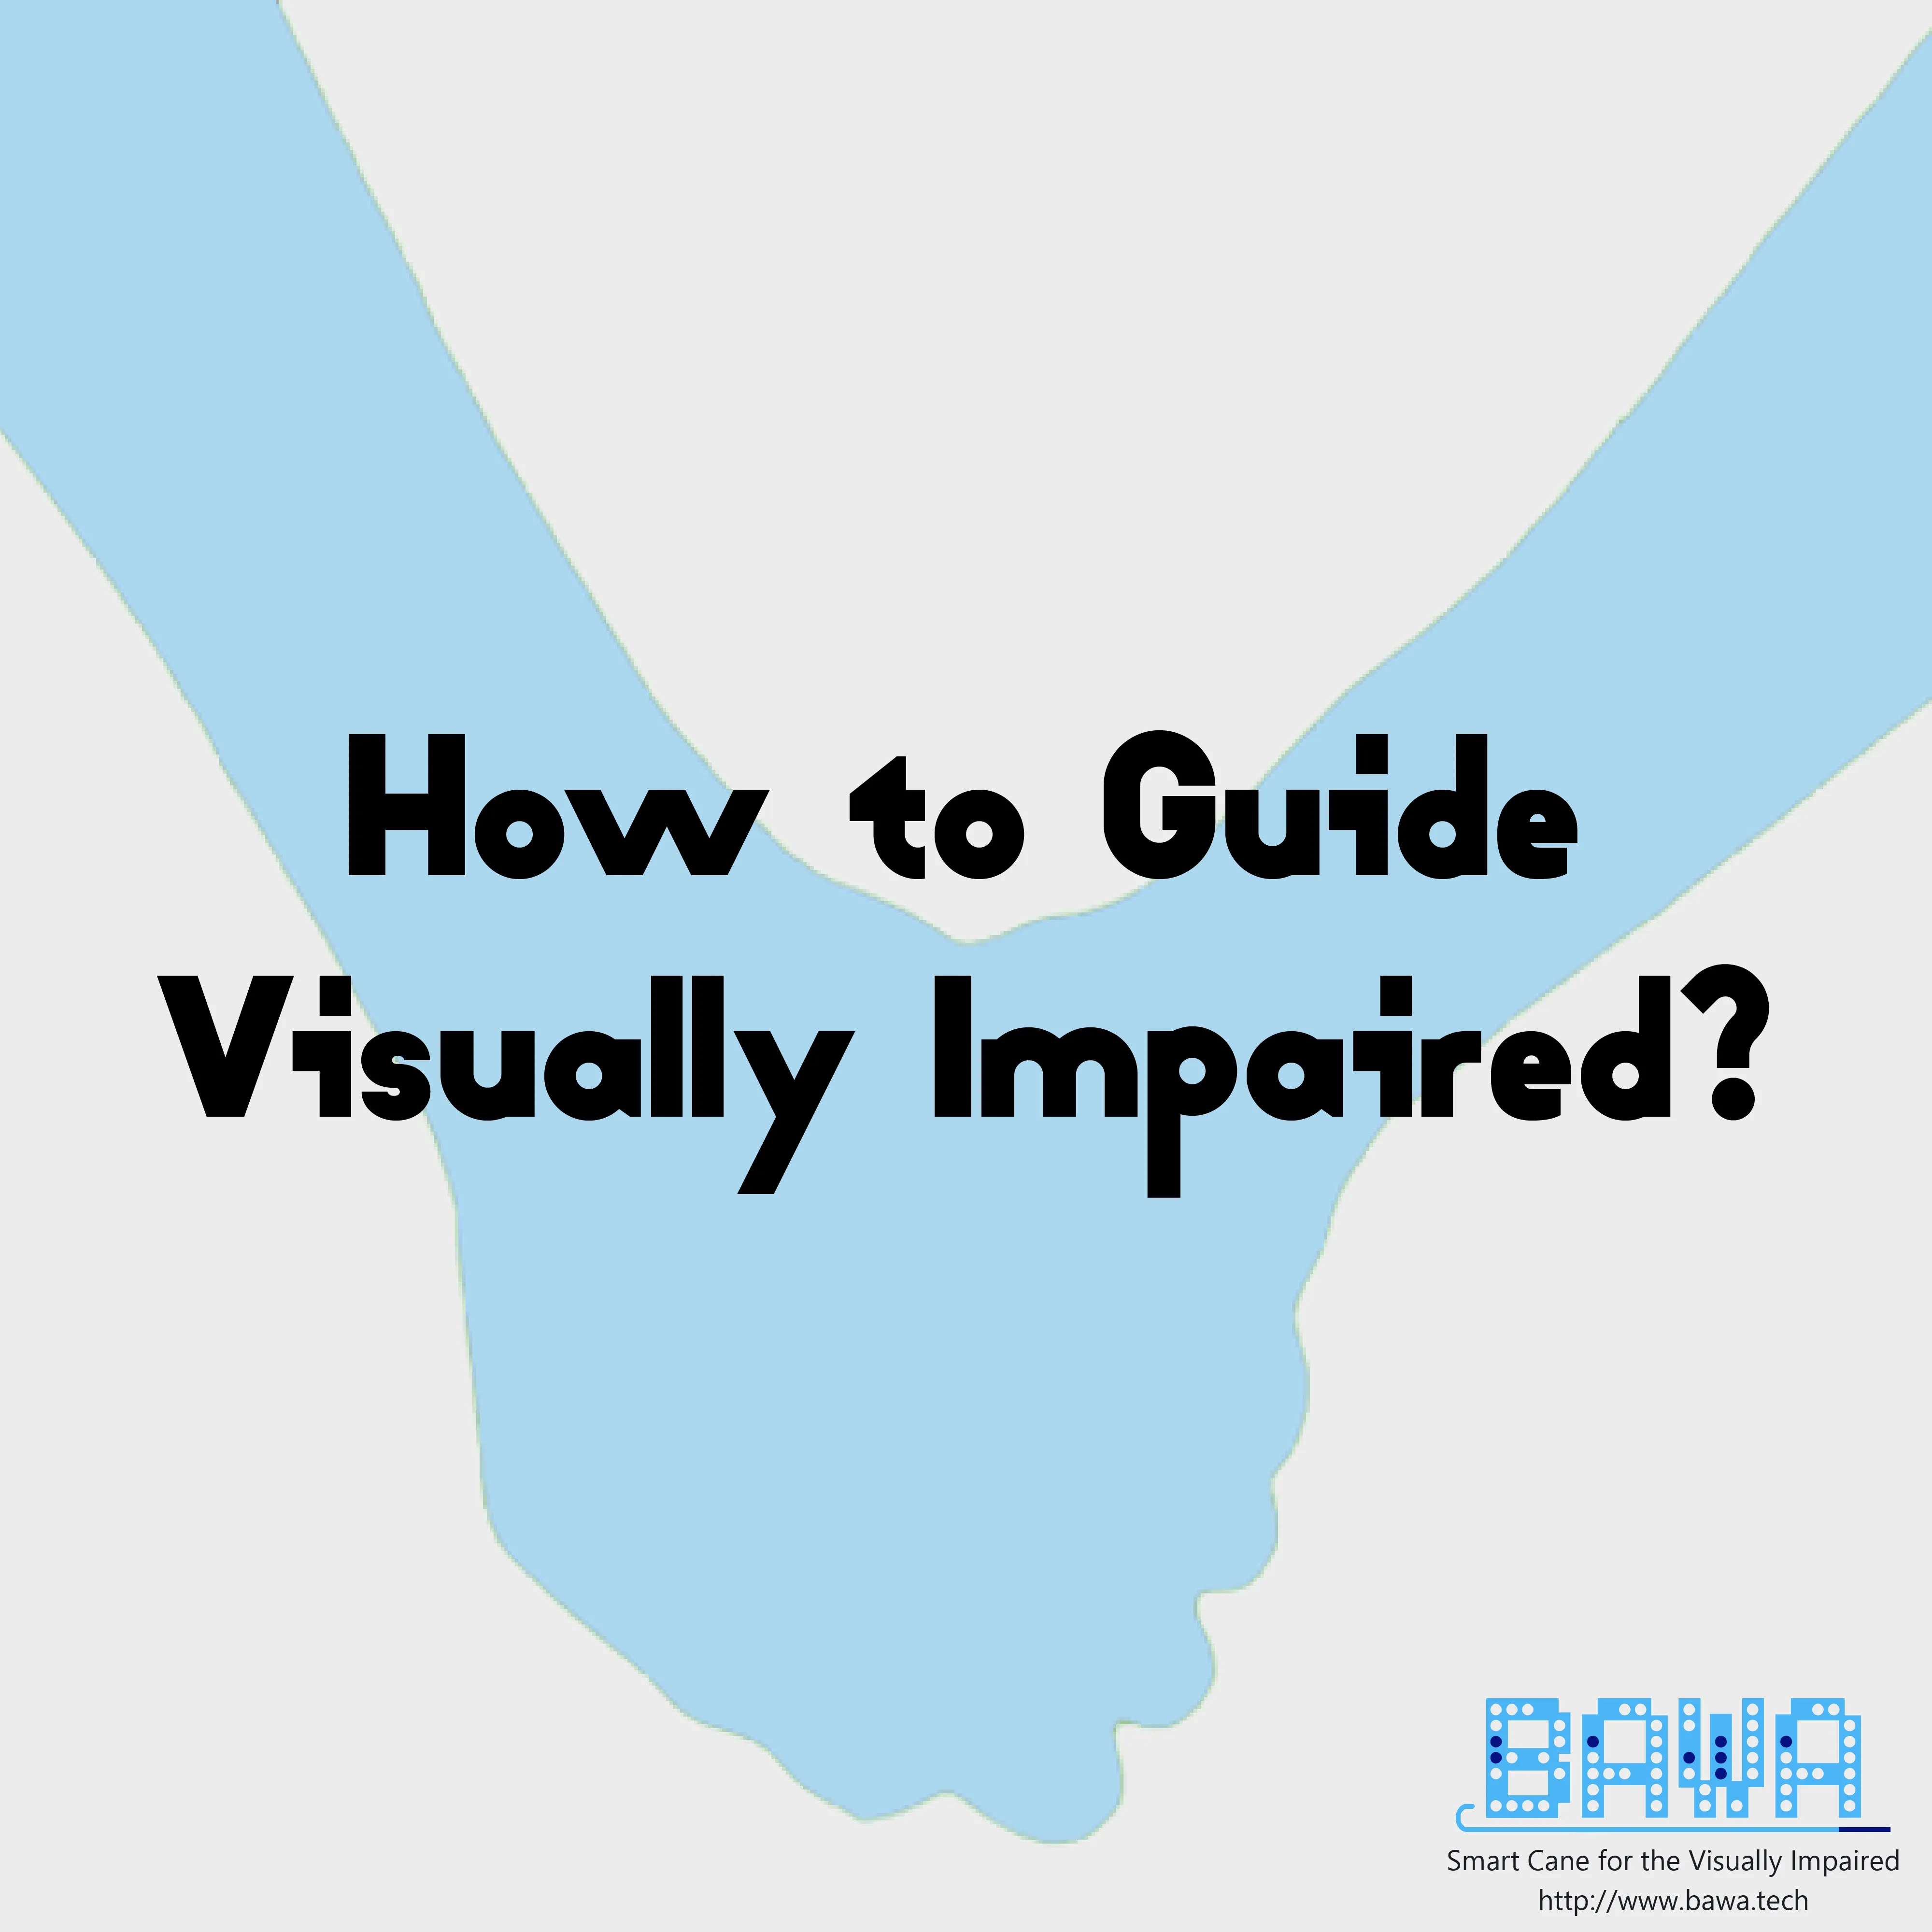 How to Guide Visually Impaired